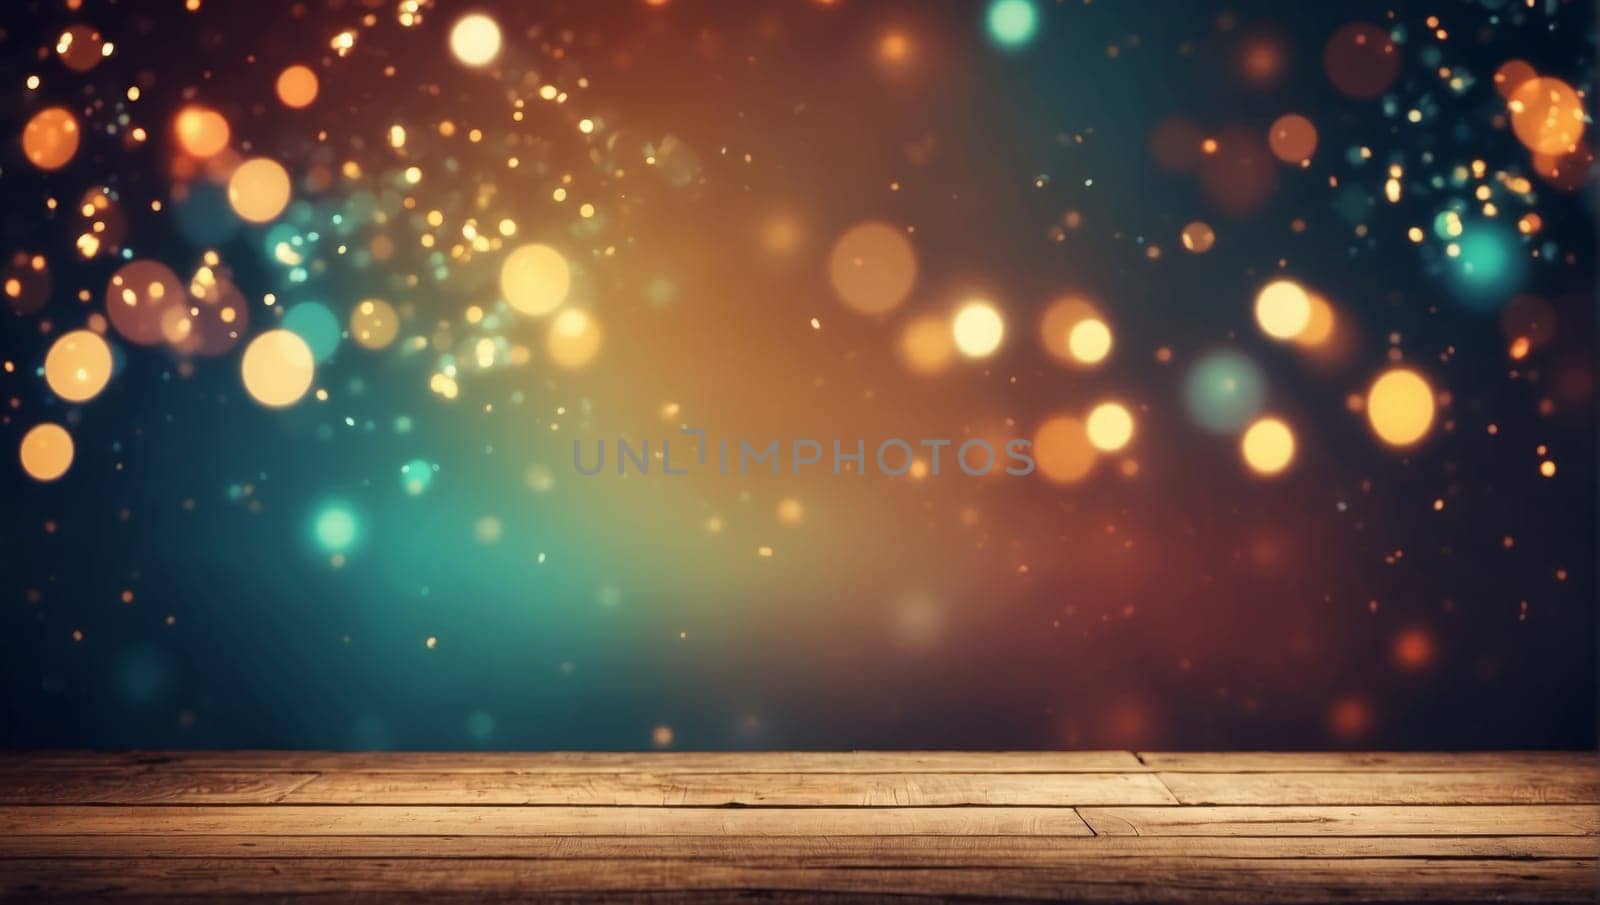 Empty table in front of christmas tree with decorations background. For product display montage by bizzyb0y